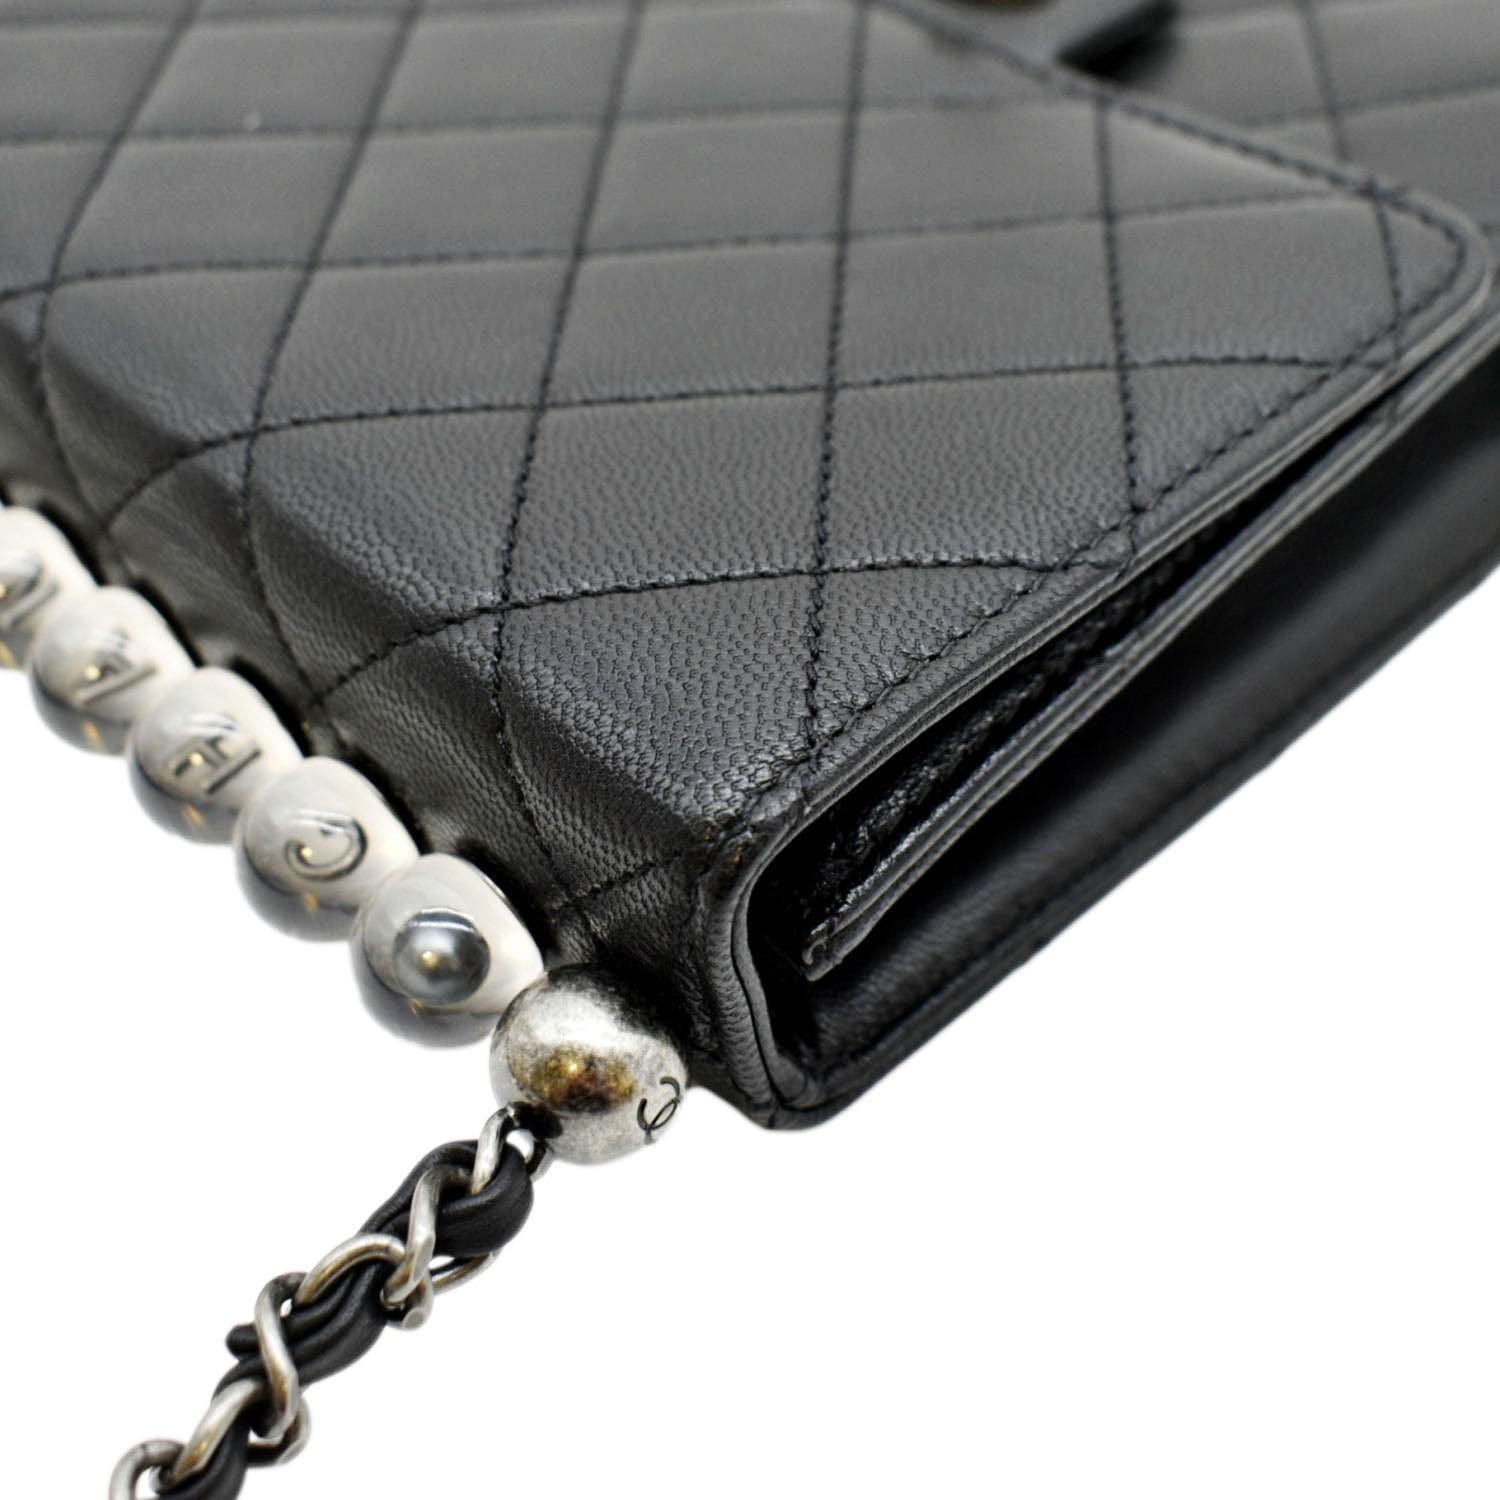 Chanel Black Quilted Calfskin Leather Wallet with Pearl Chain